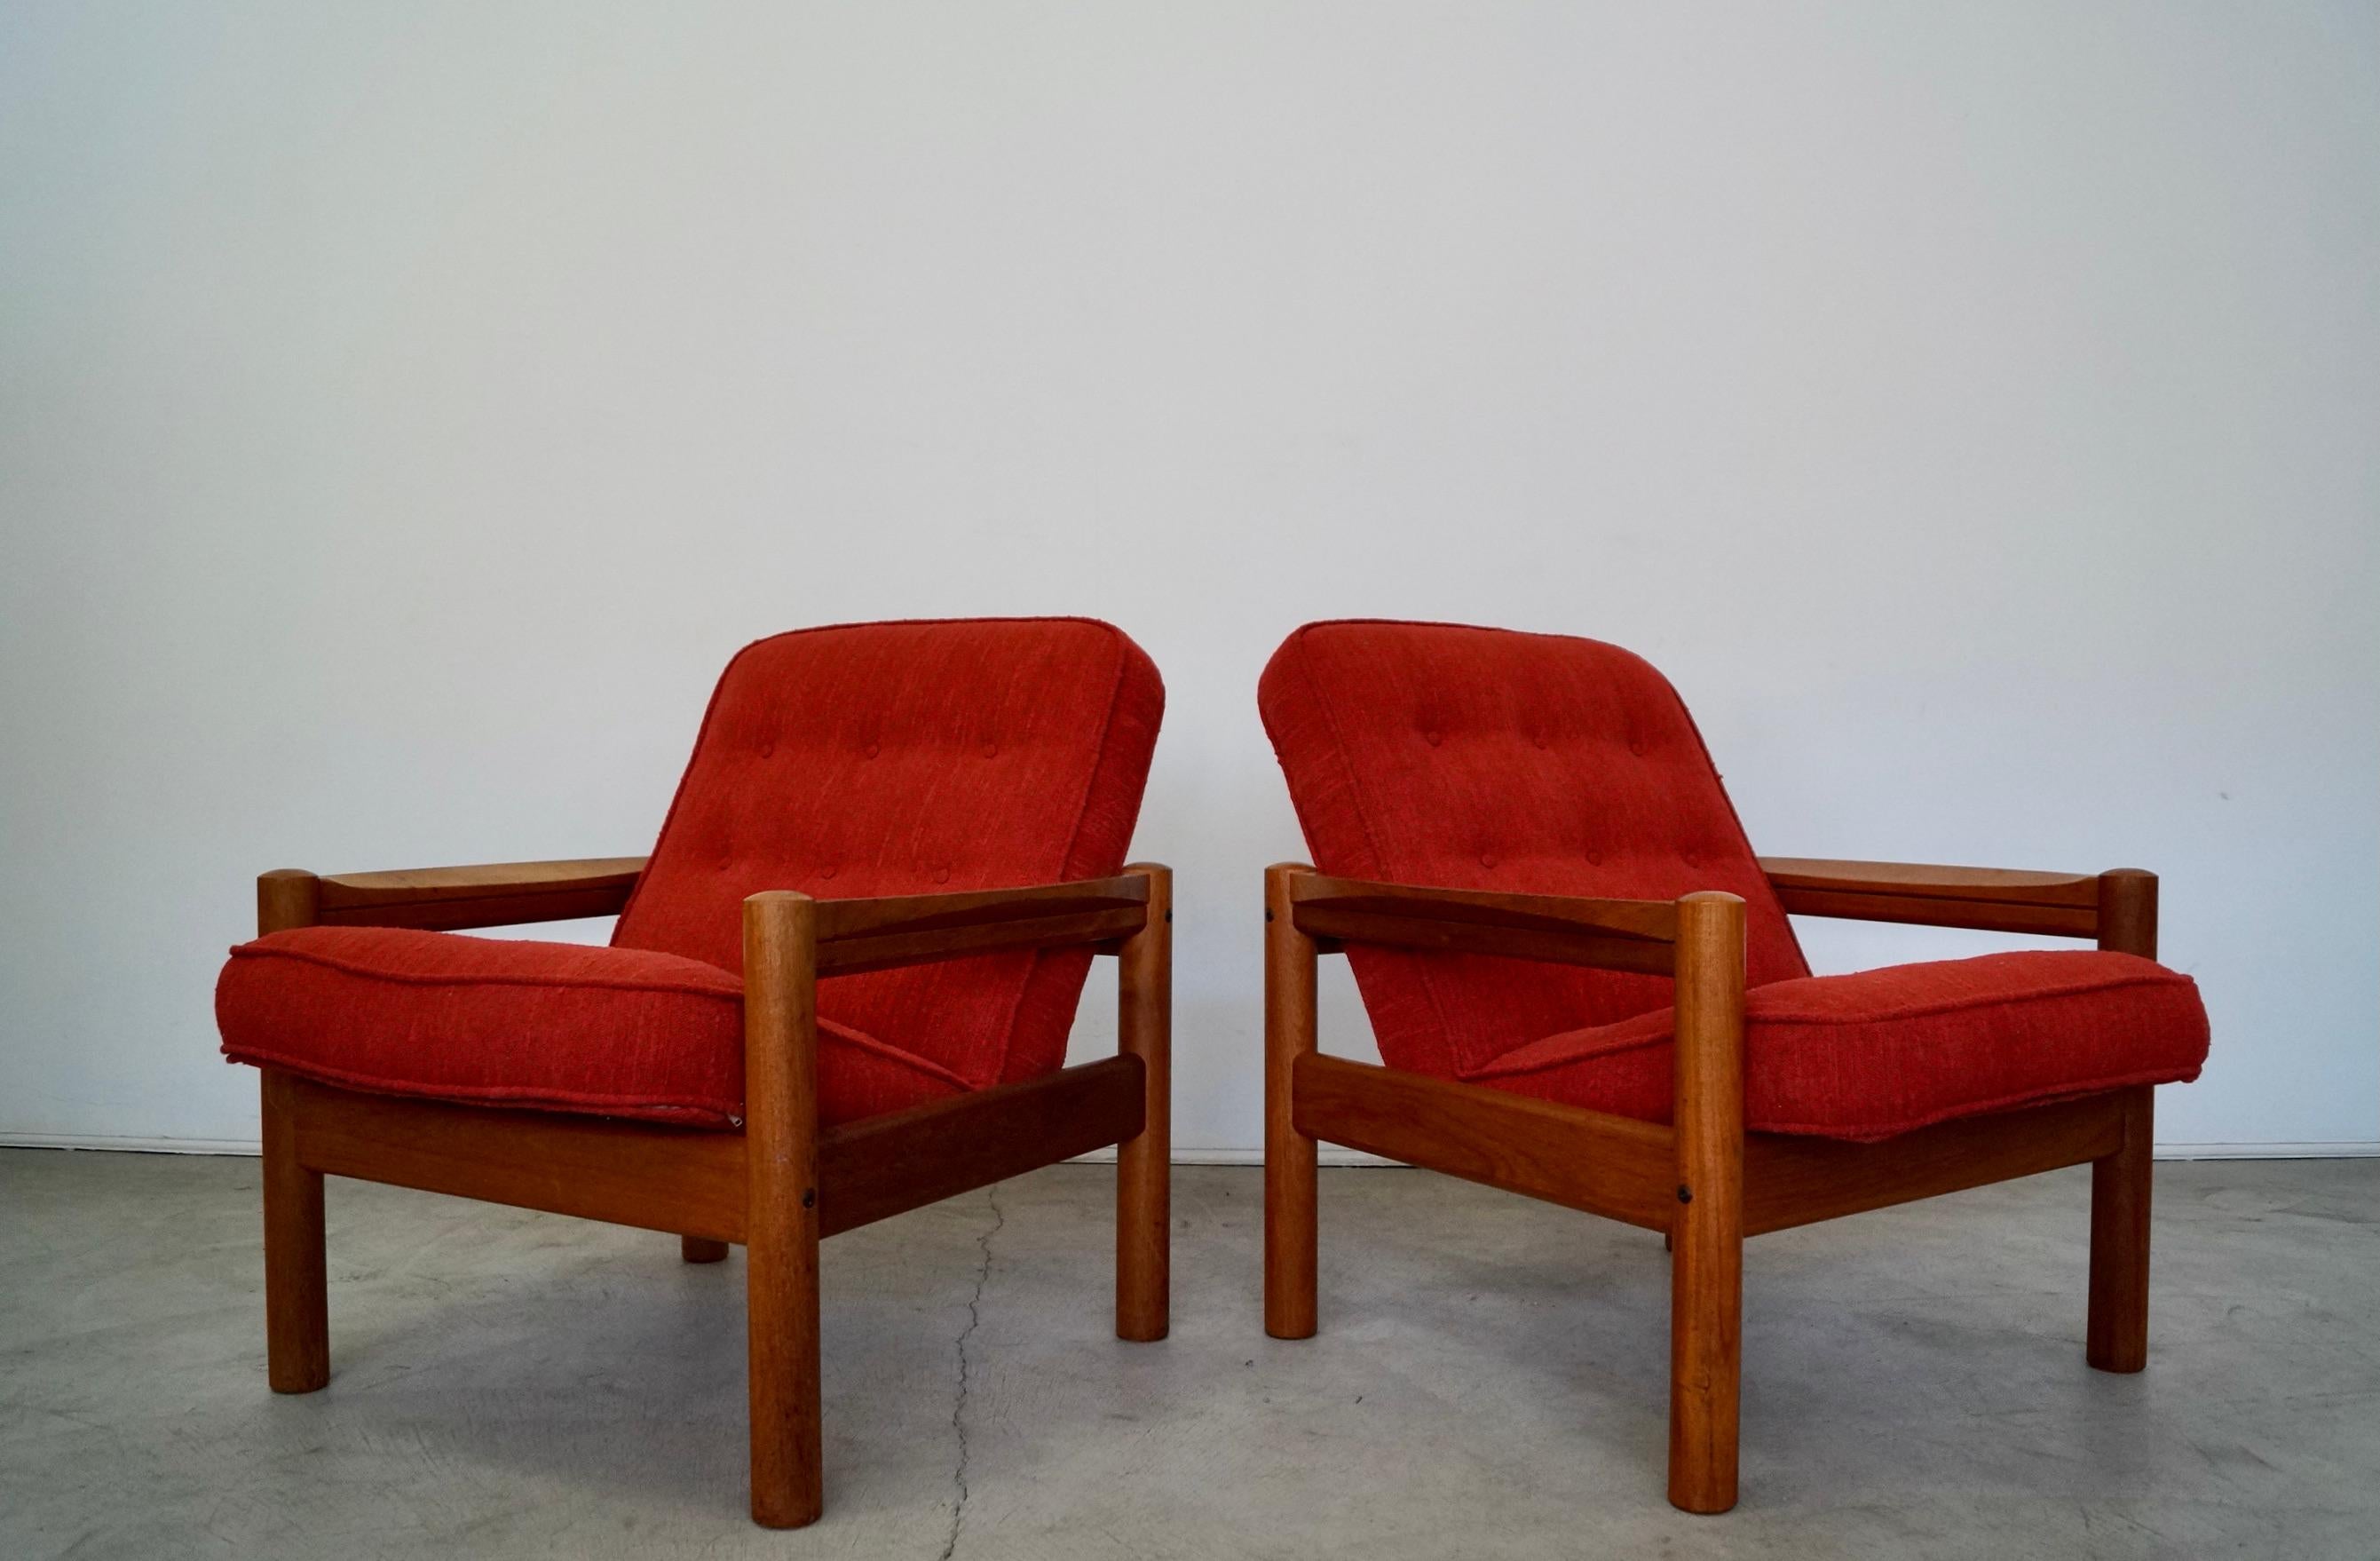 Late 20th Century 1970's Danish Modern Teak Lounge Chairs by Domino Mobler - a Pair For Sale